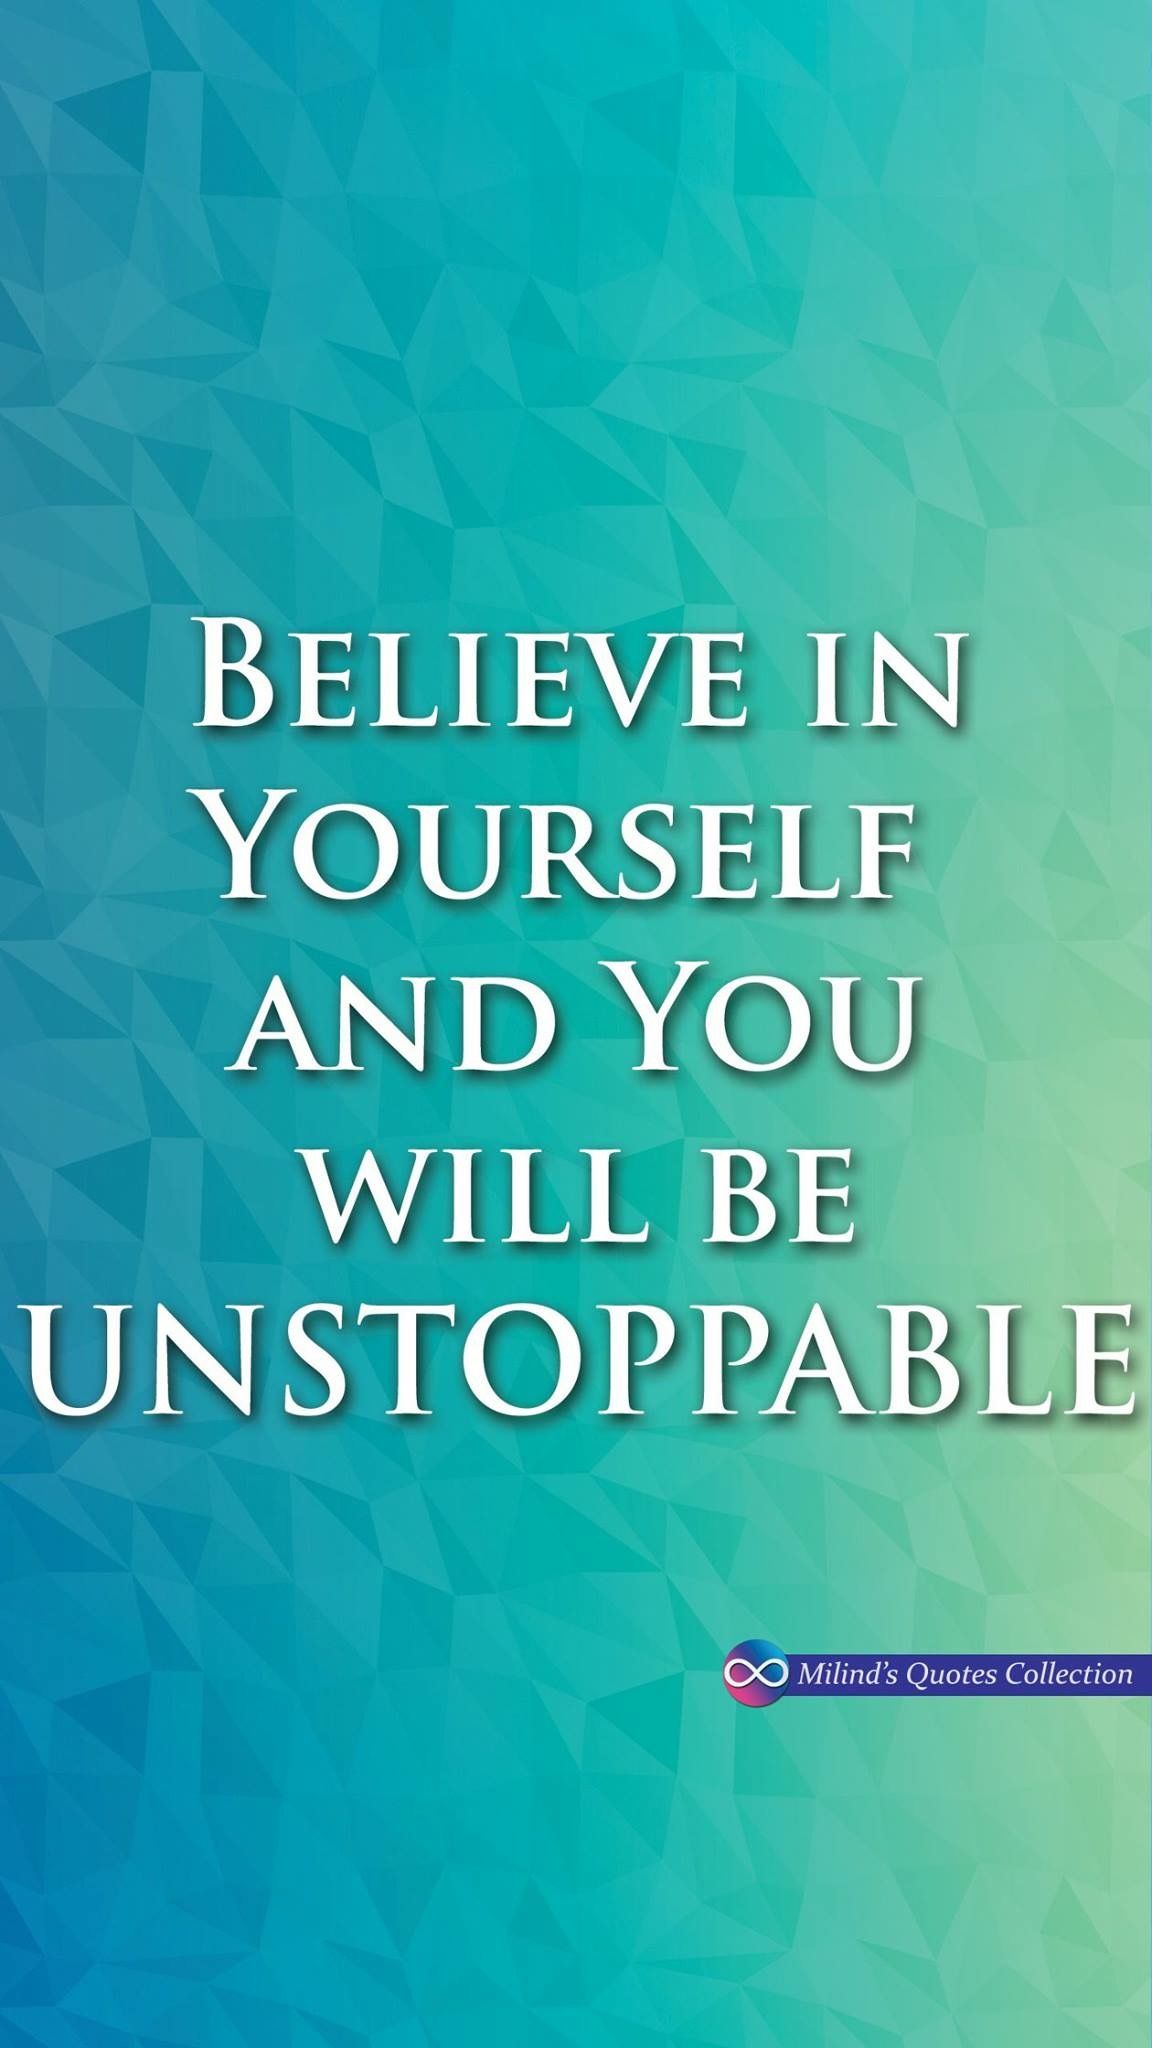 Believe in #Yourself and #You will be #UNSTOPPABLE. #MilindsQuotesCollection #Quotes #Wallpaper #Picofth. Unstoppable quotes, Wallpaper quotes, Believe